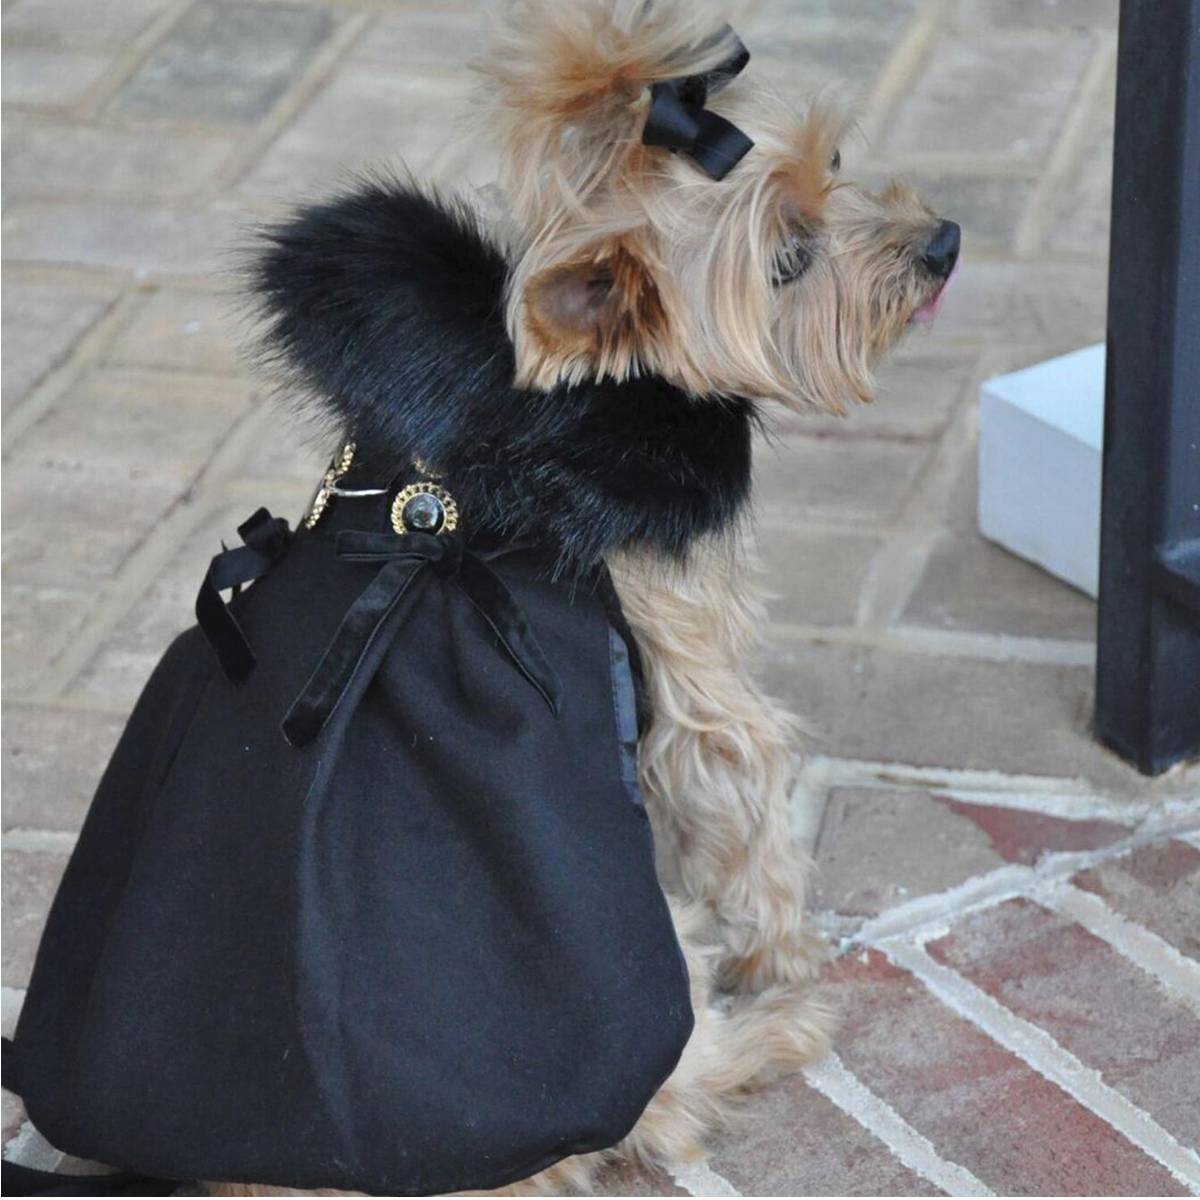 Wool Dog Coat Fur Trimmed in Black | Pawlicious & Company